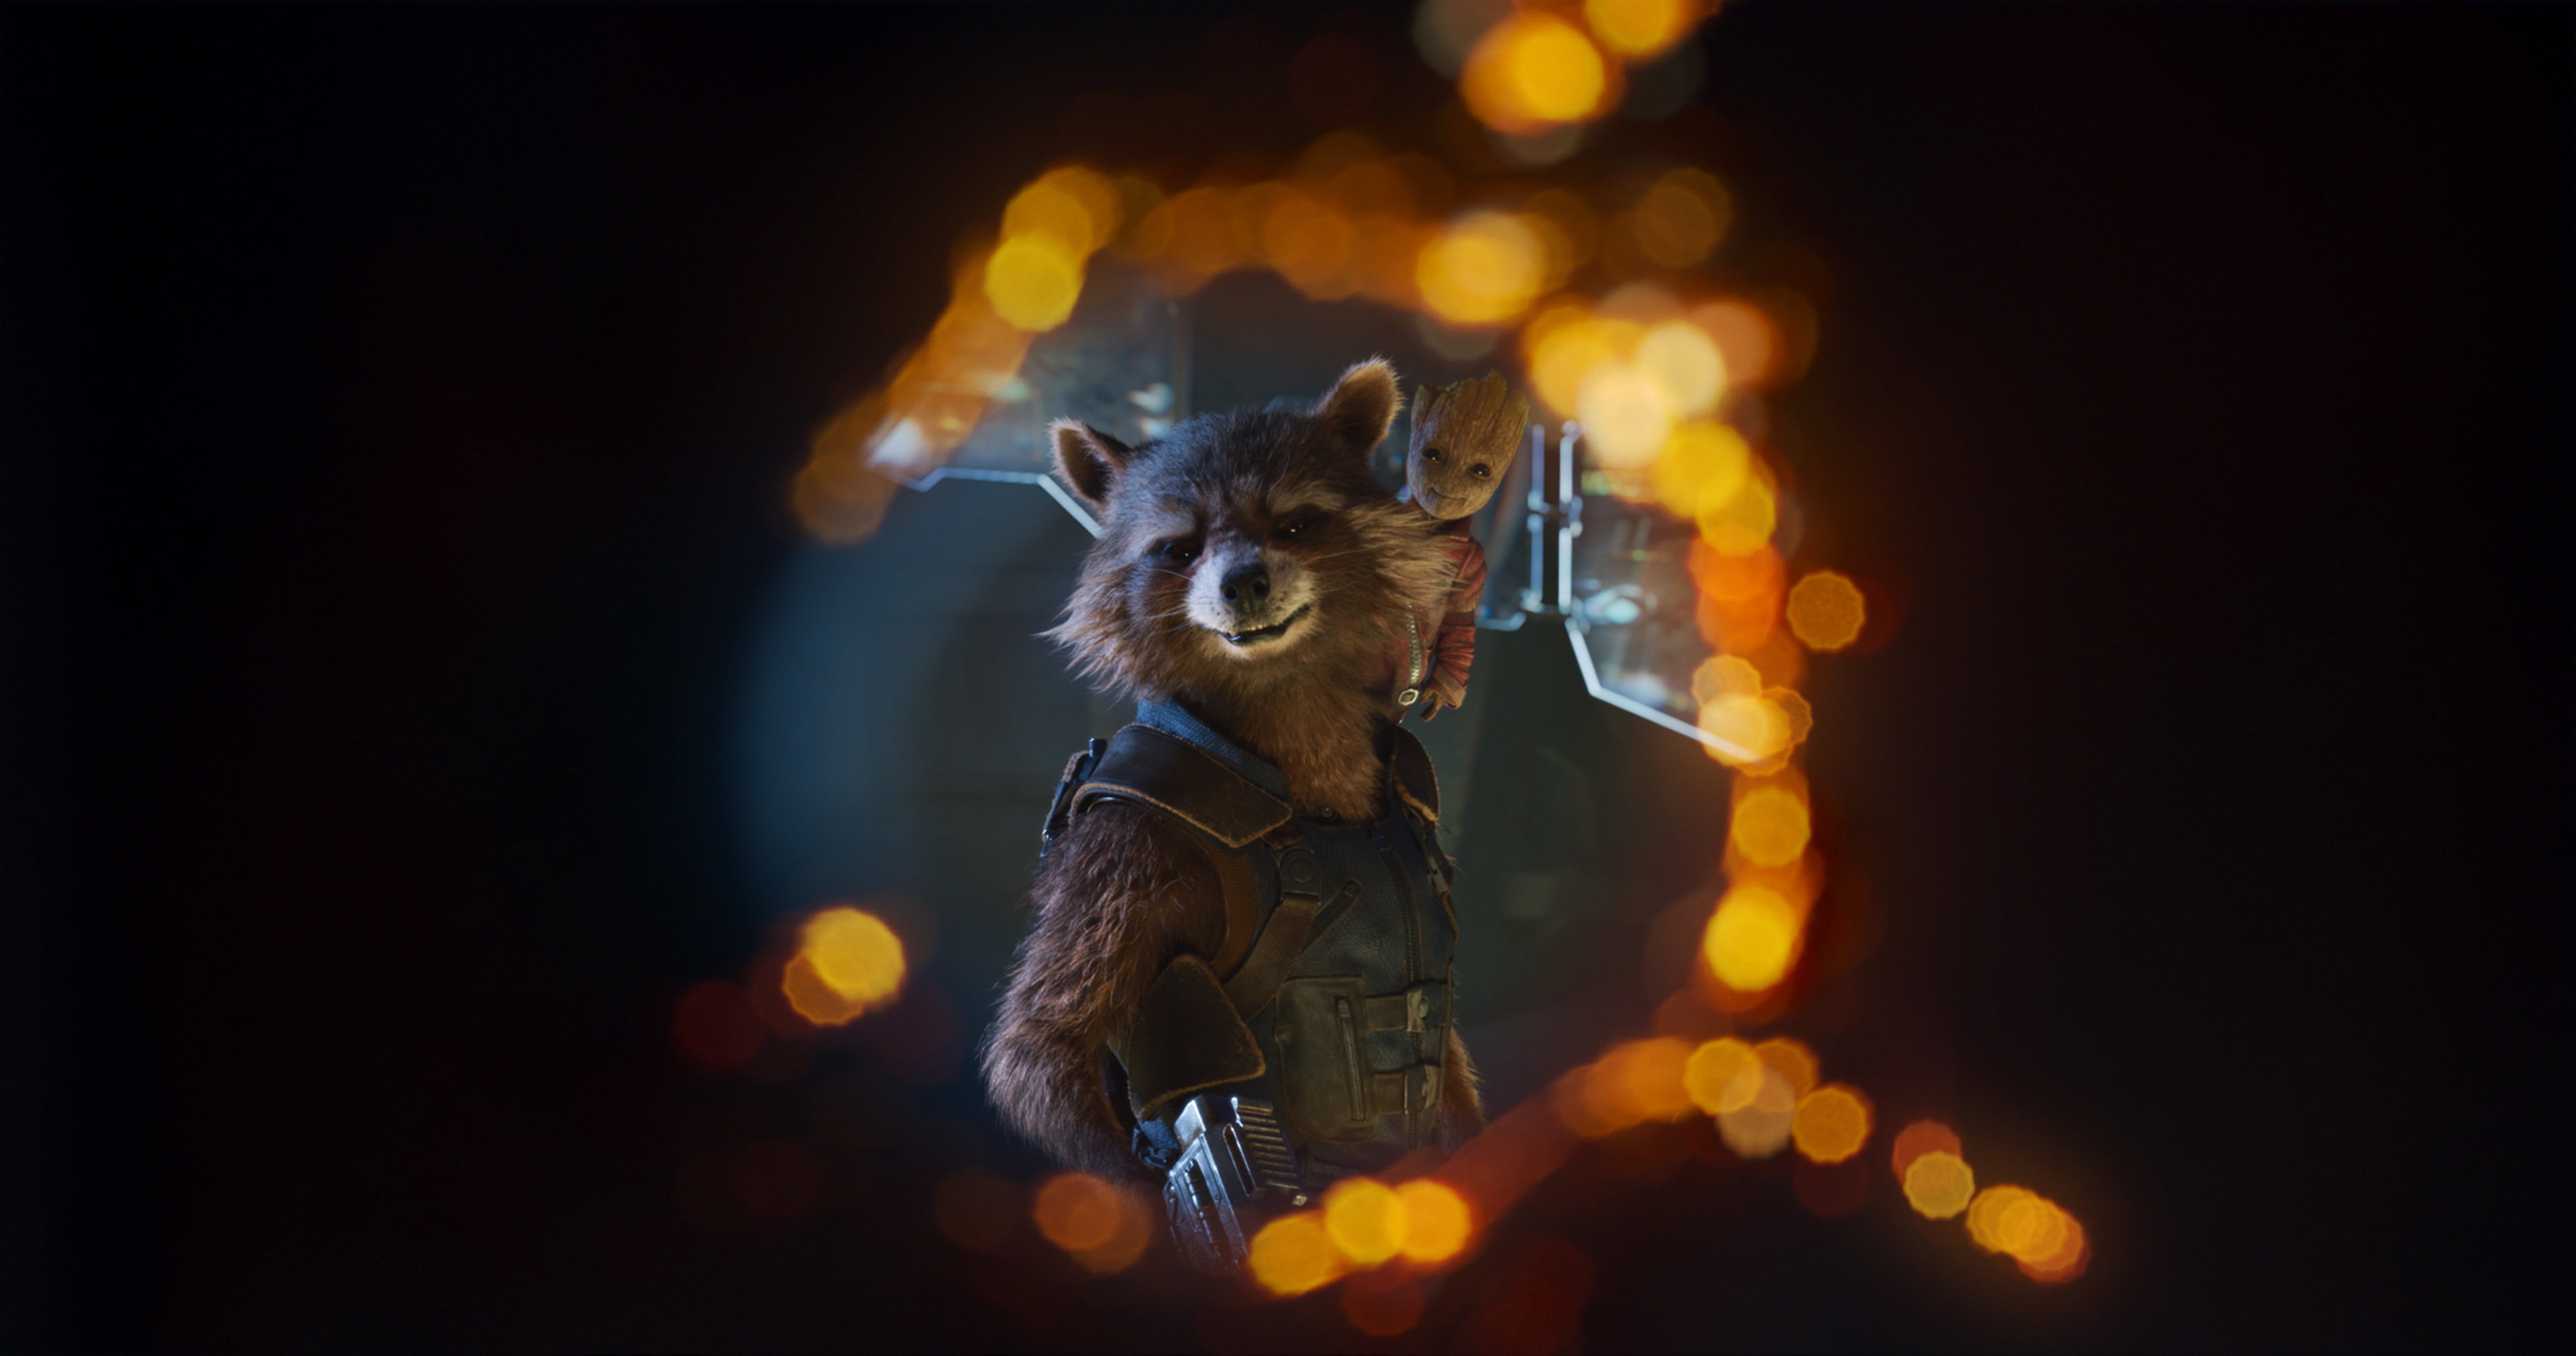 Guardians of the Galaxy Volume 2's Rocket